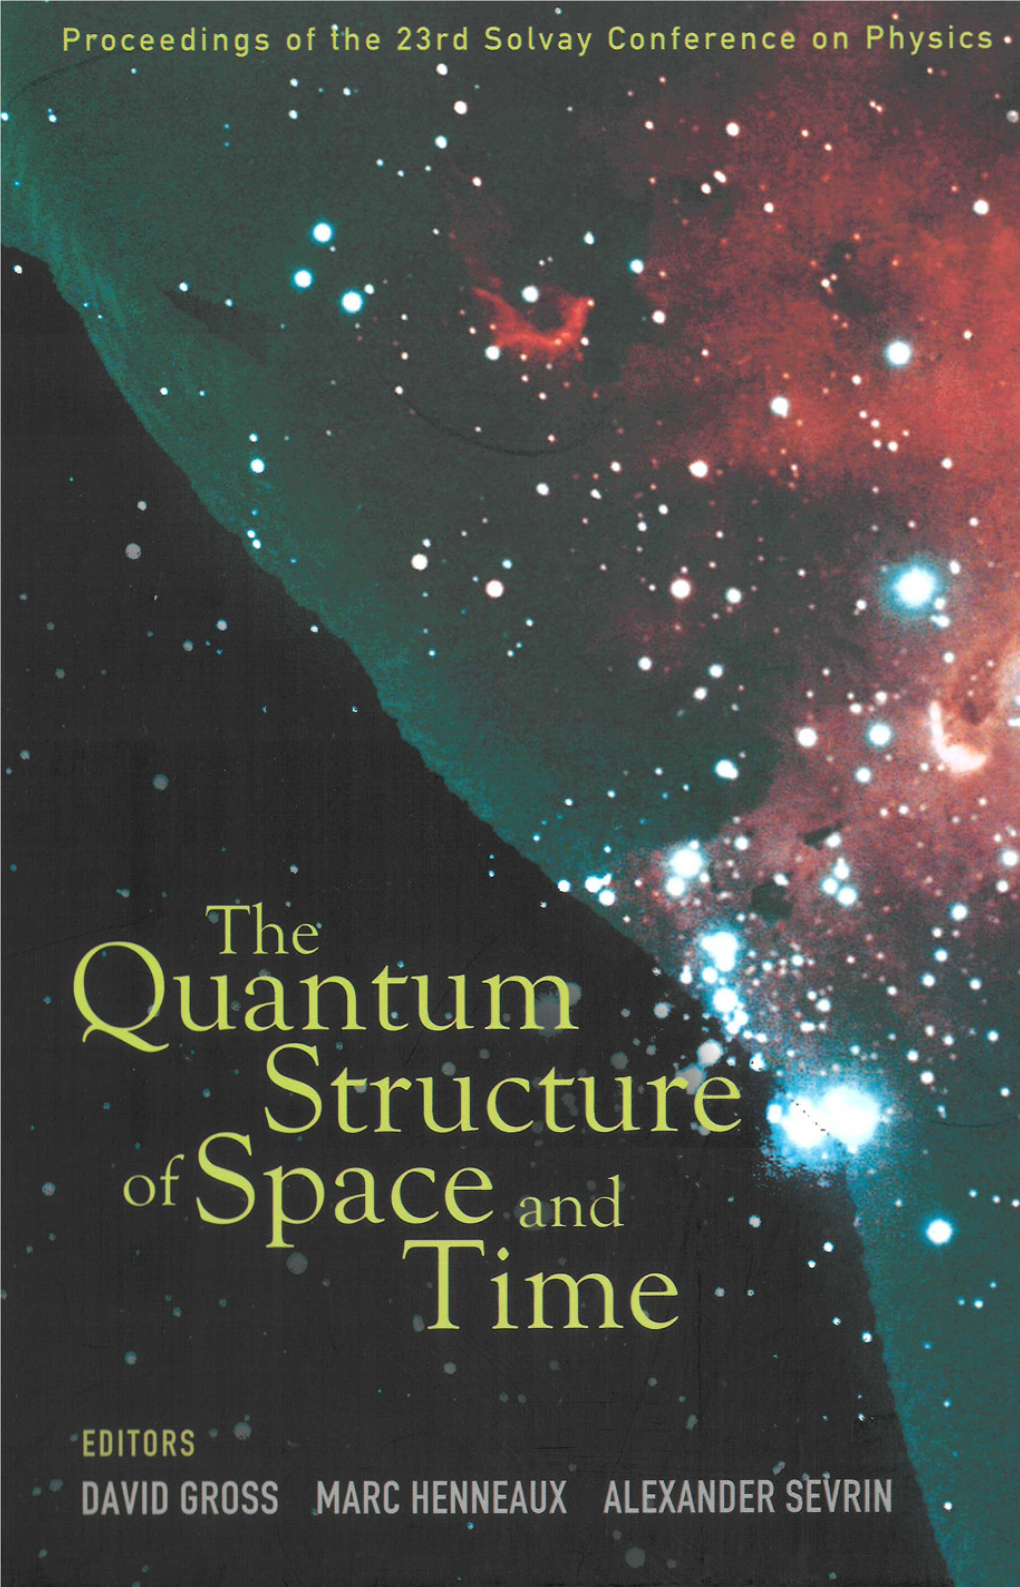 The Quantum Structure of Space and Time